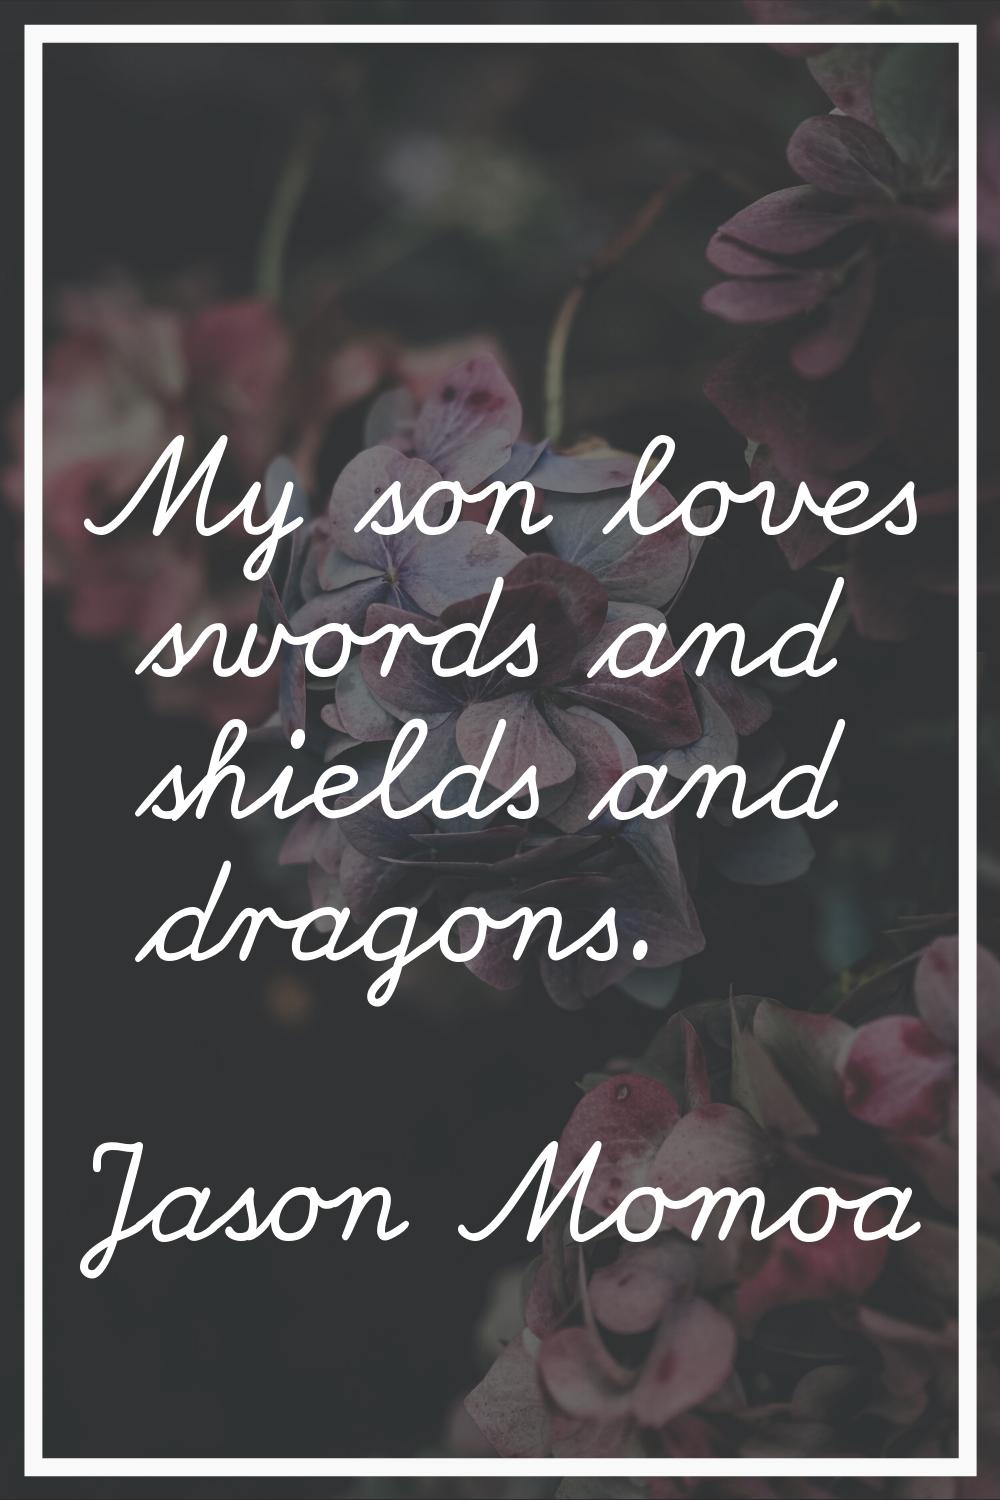 My son loves swords and shields and dragons.